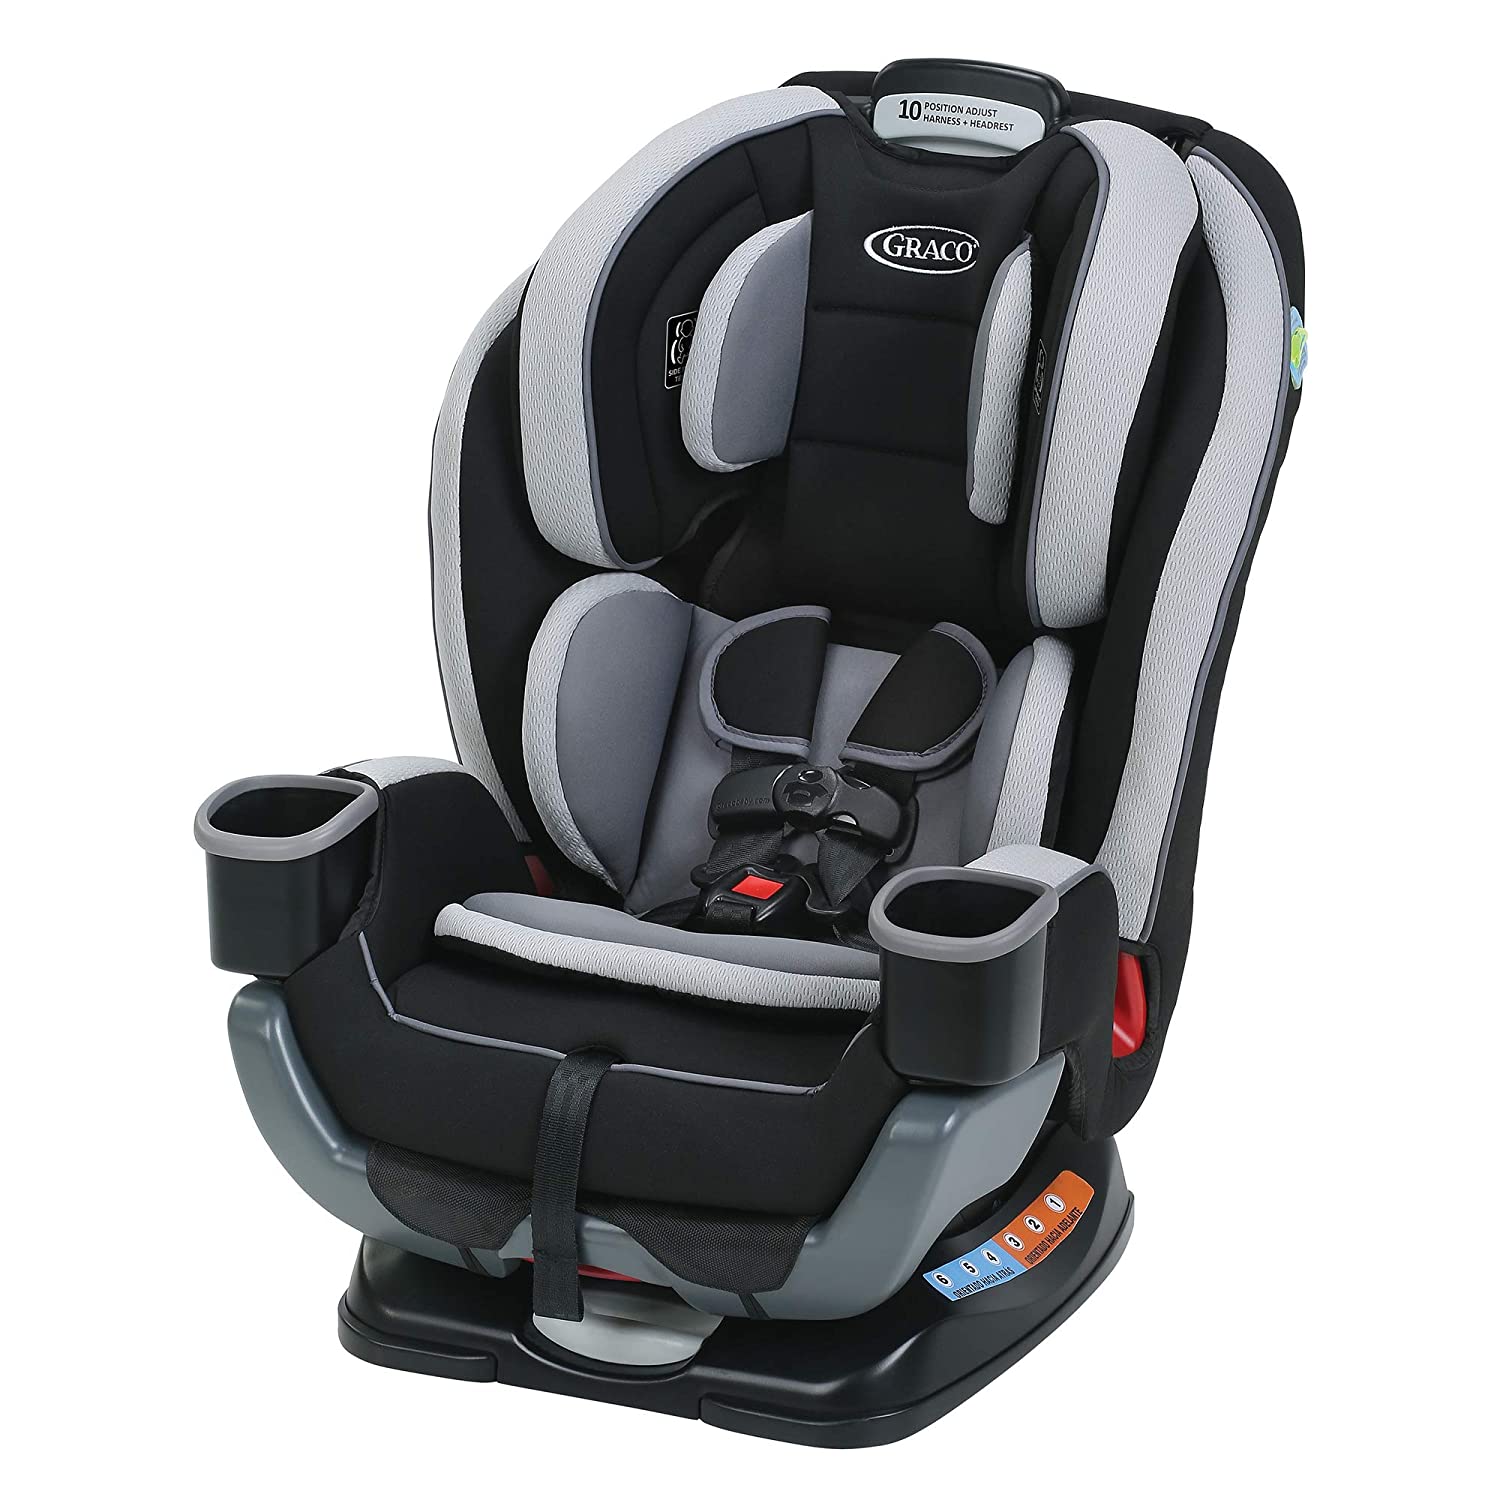 graco-car-seat-extend2fit-3-in-1-174-79-today-only-become-a